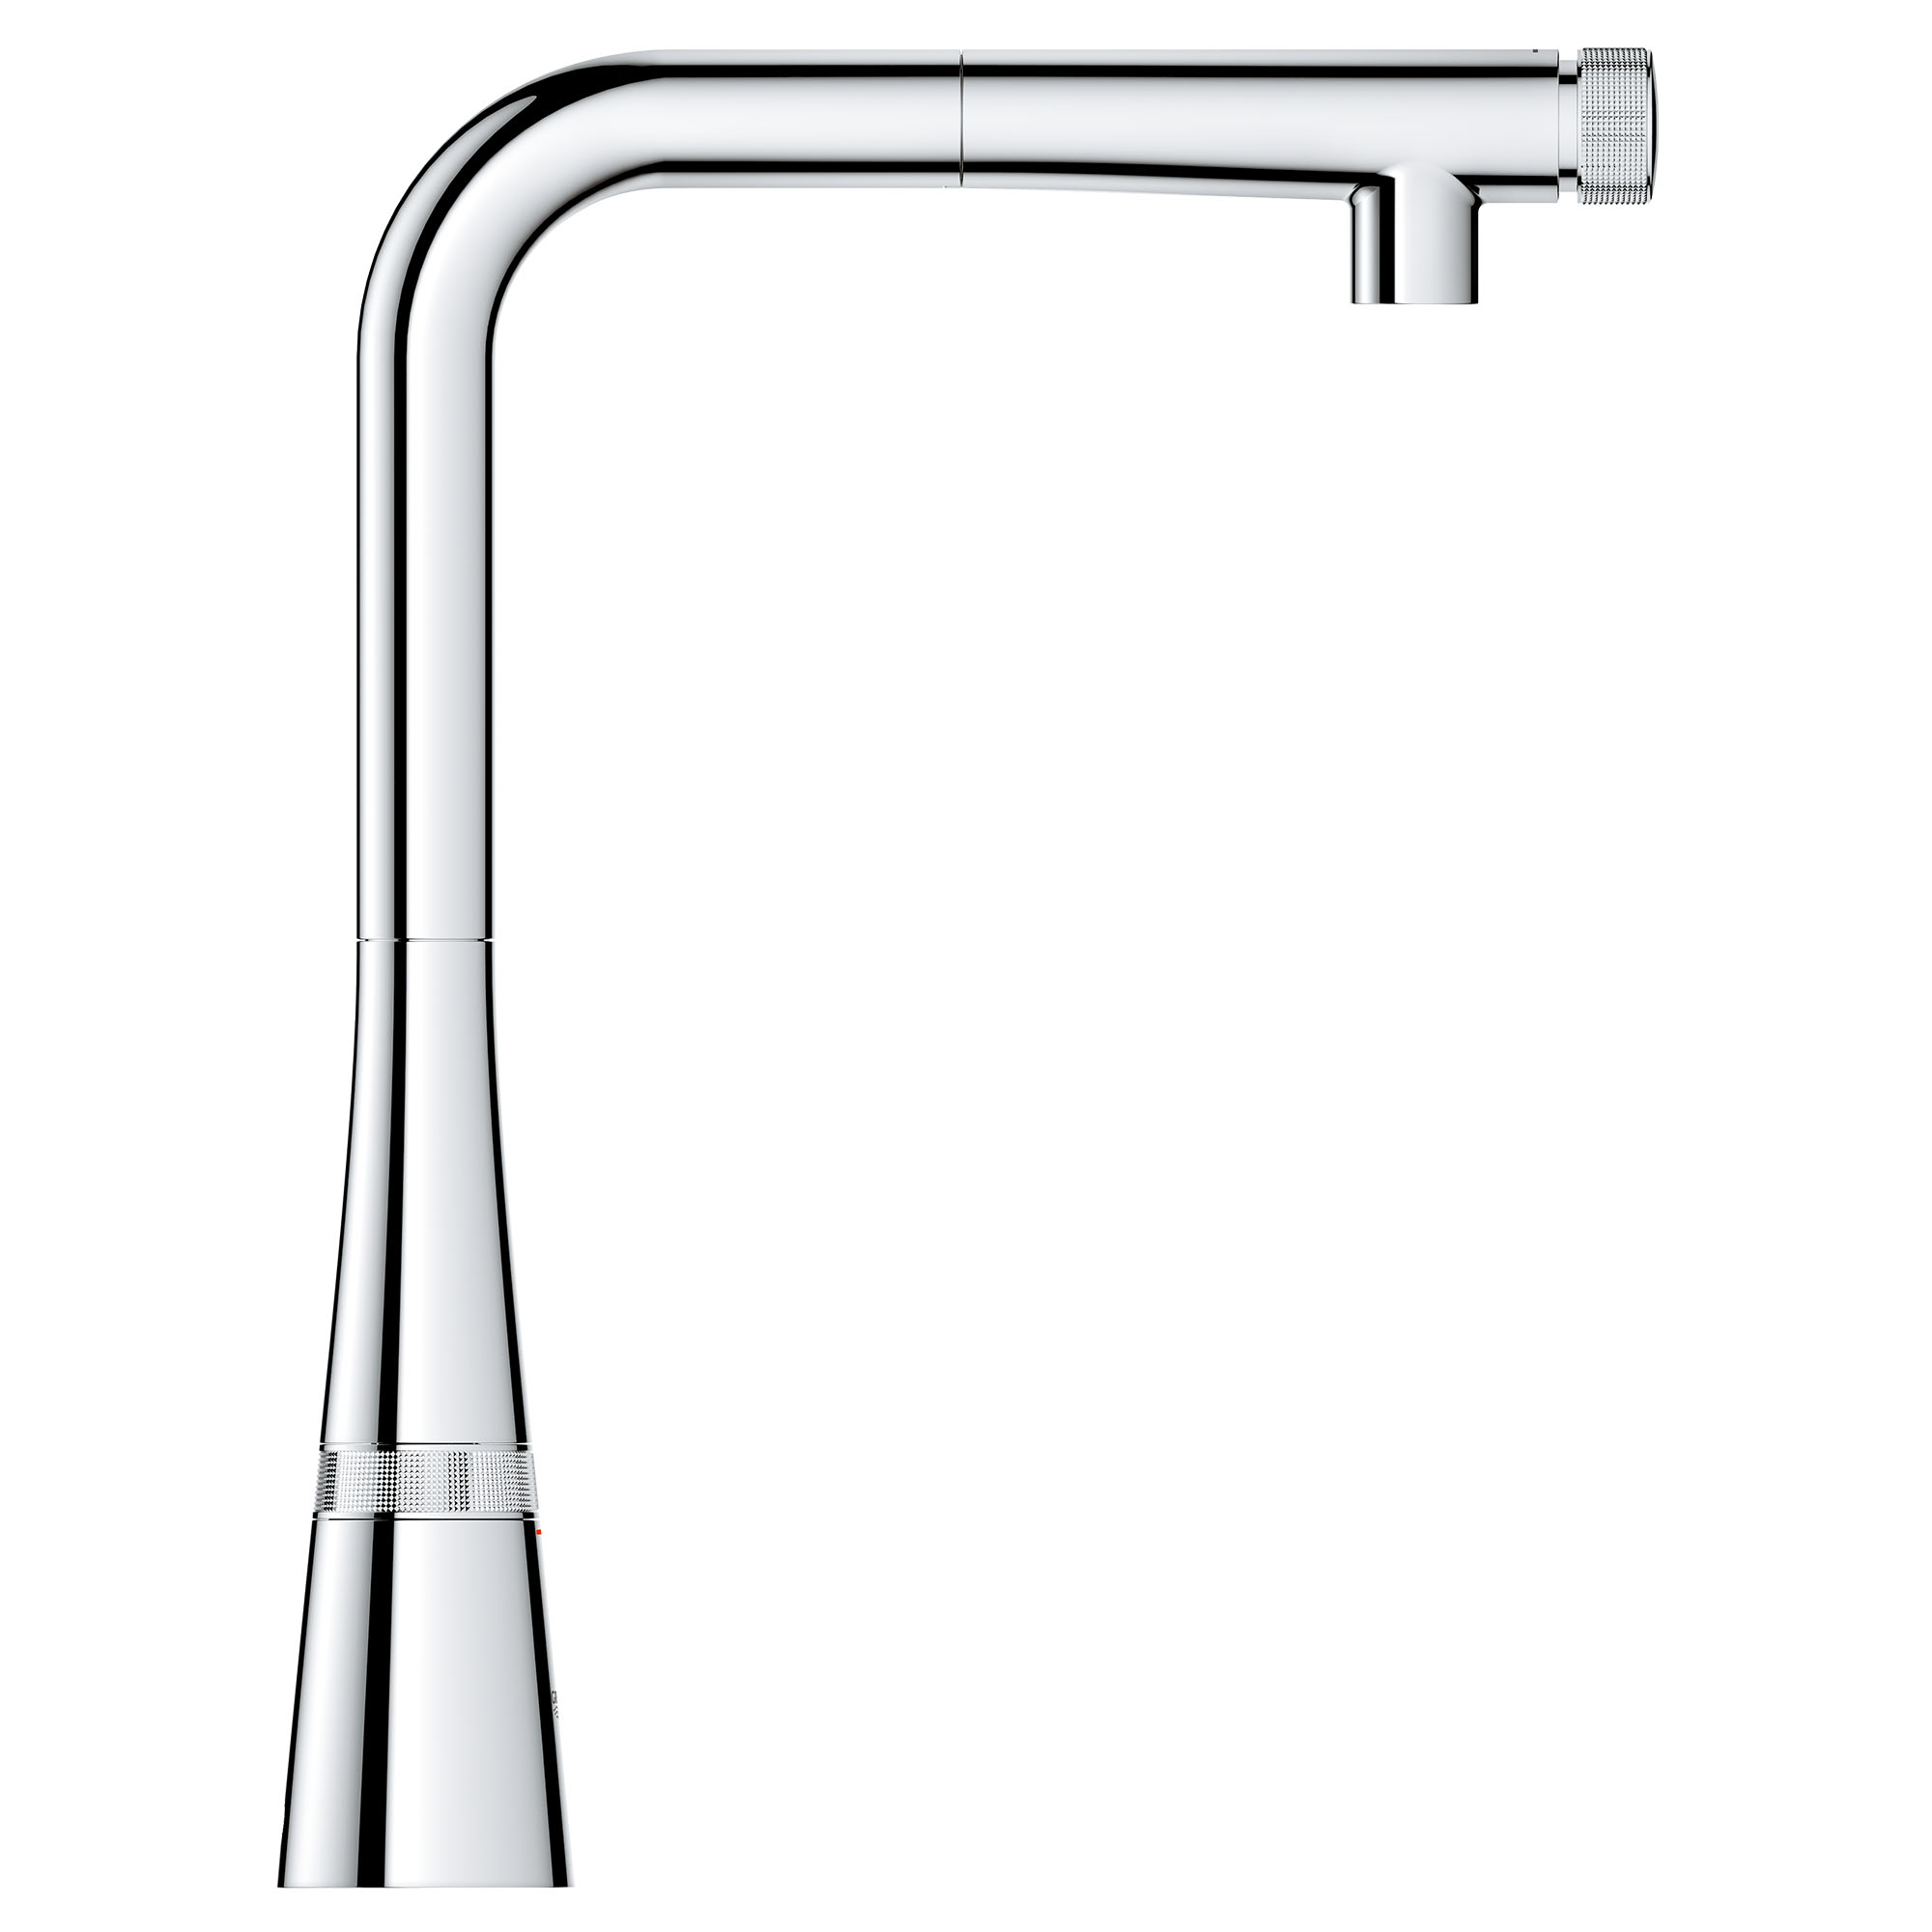 SmartControl Pull-Out Single Spray Kitchen Faucet 1.75 GPM (6.6 L/min)